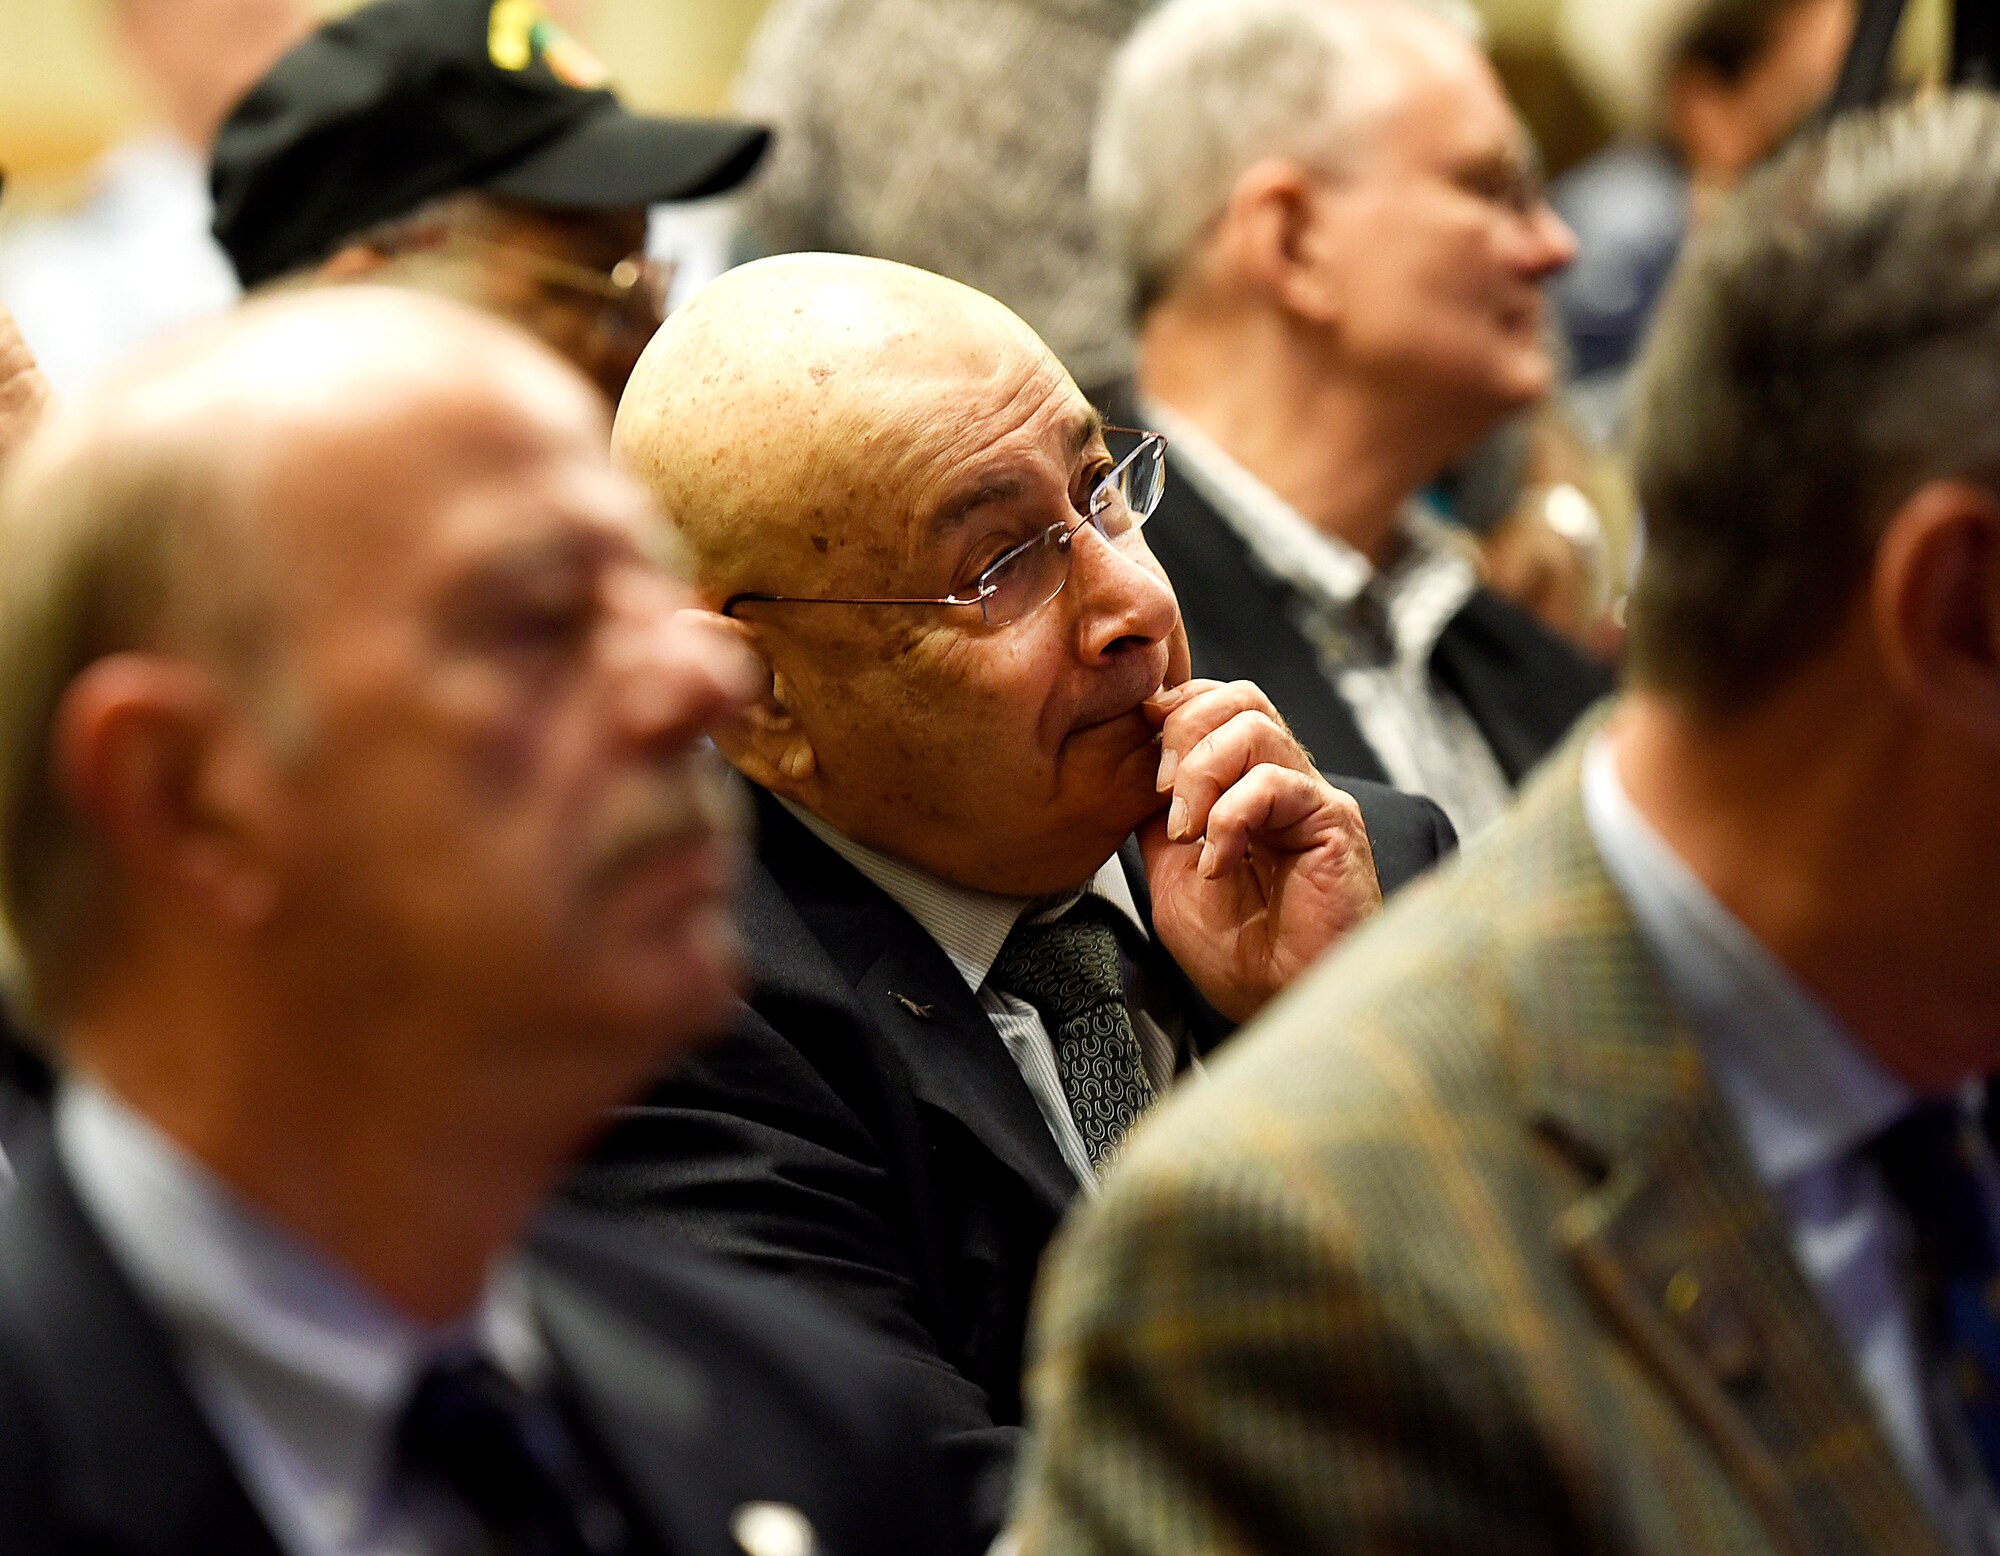 A Vietnam War veteran sits in the crowd during a ceremony recognizes veterans of the war at the Pentagon, Washington, D.C., June 21, 2016. The event, hosted by the Air Force Reserve, recognized more than 10 Vietnam War veterans. (U.S. Air Force photo by Staff Sgt. Alyssa C. Gibson/Release)